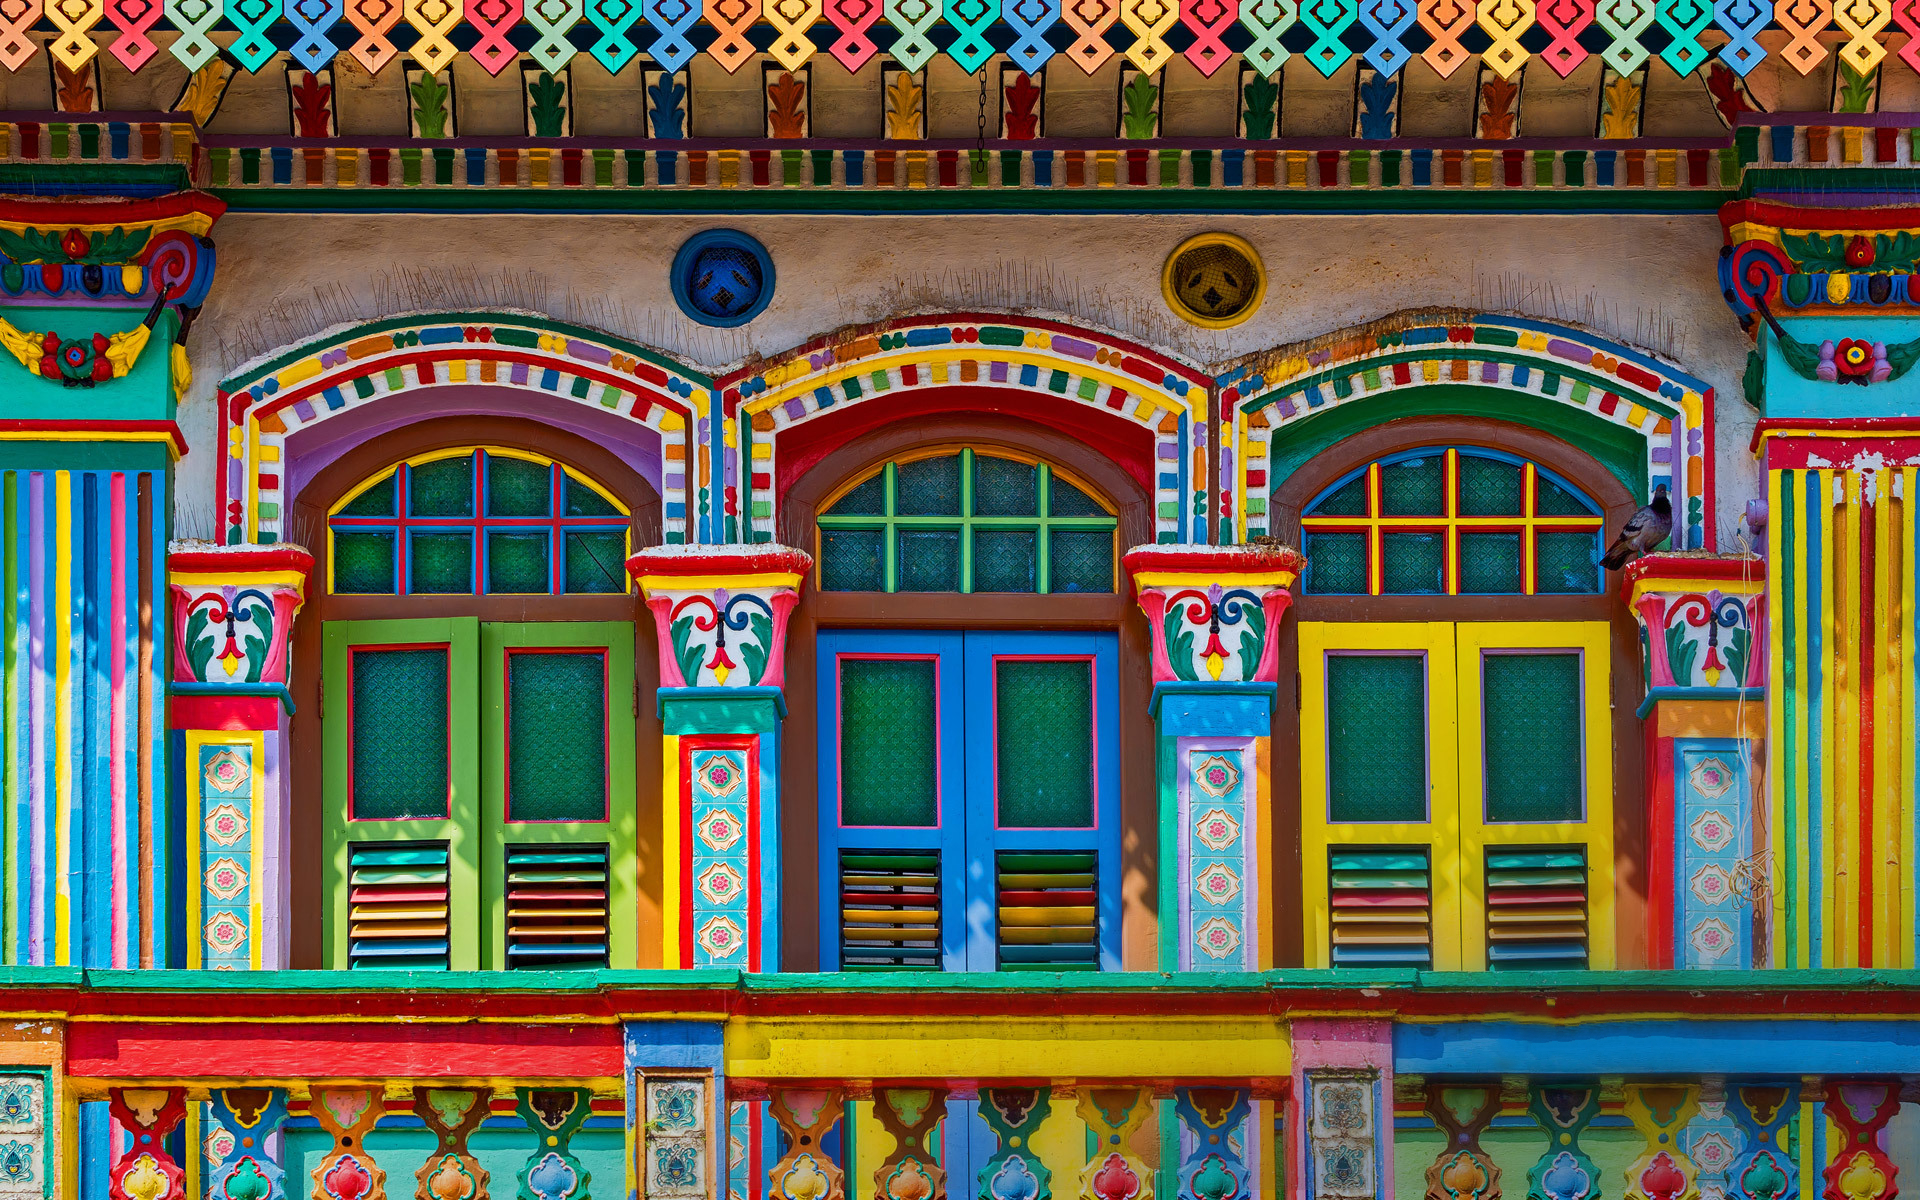 india, man made, building, colorful, colors, facade